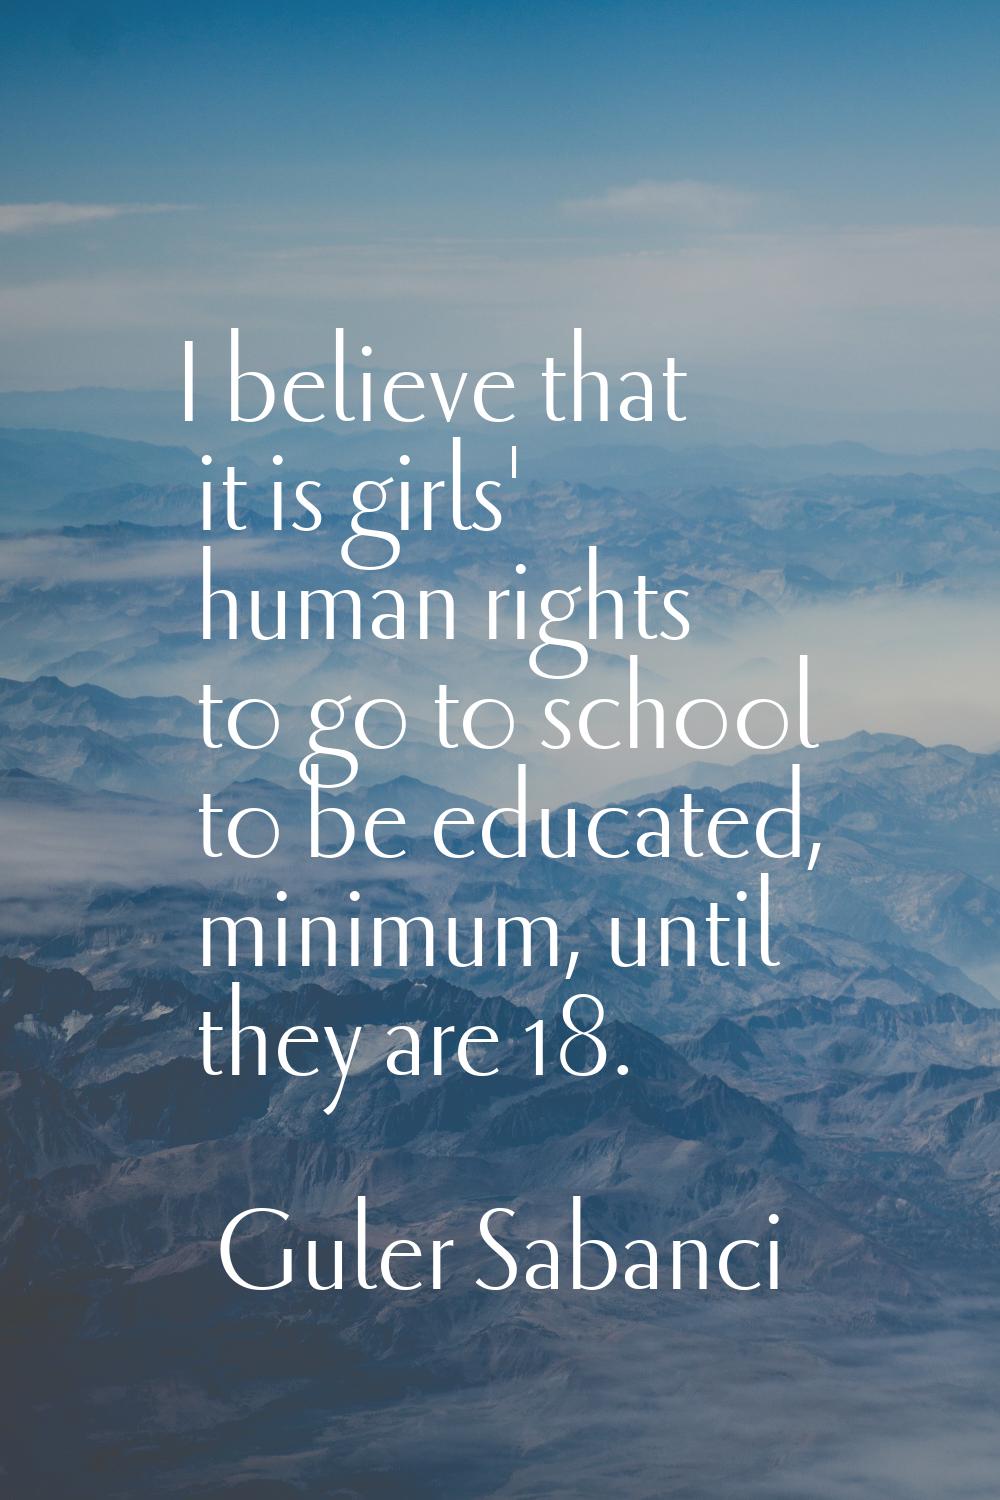 I believe that it is girls' human rights to go to school to be educated, minimum, until they are 18